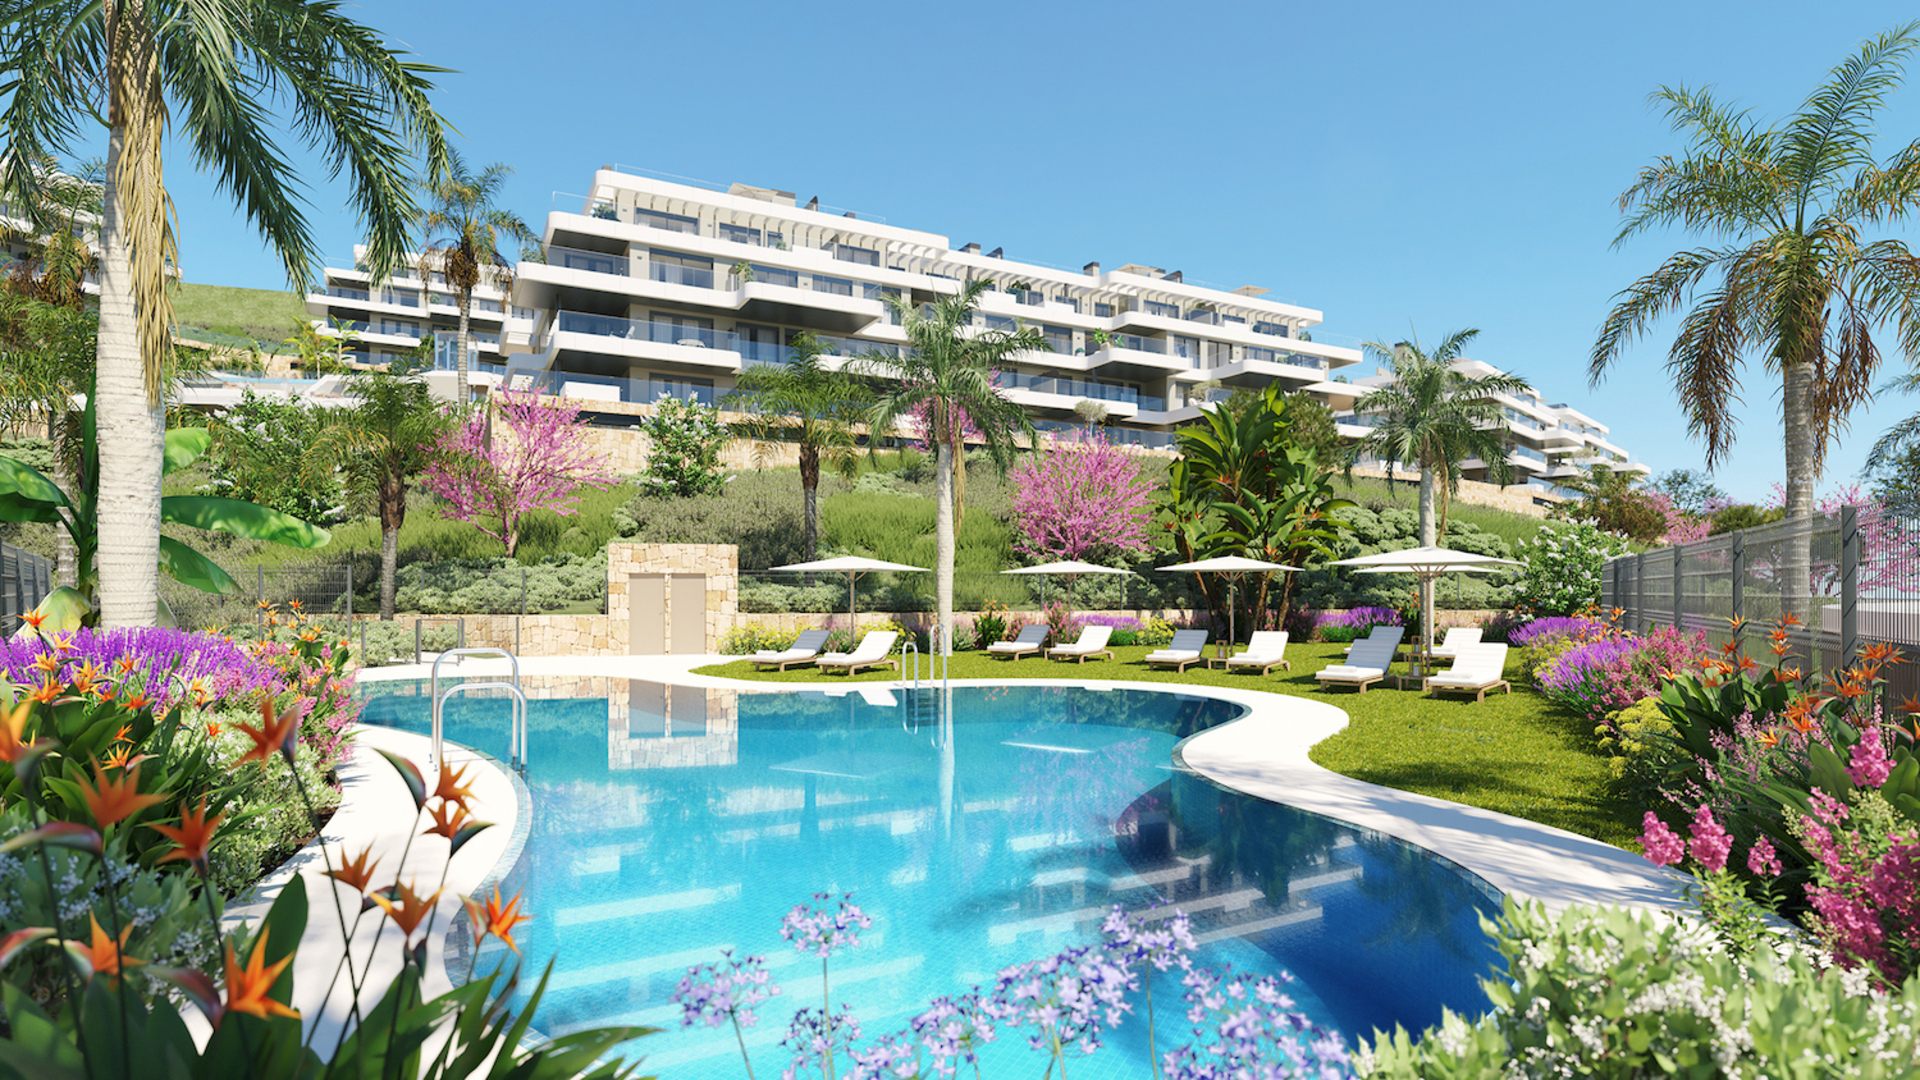 Superior residential project next to the golf course in La Cala de Mijas